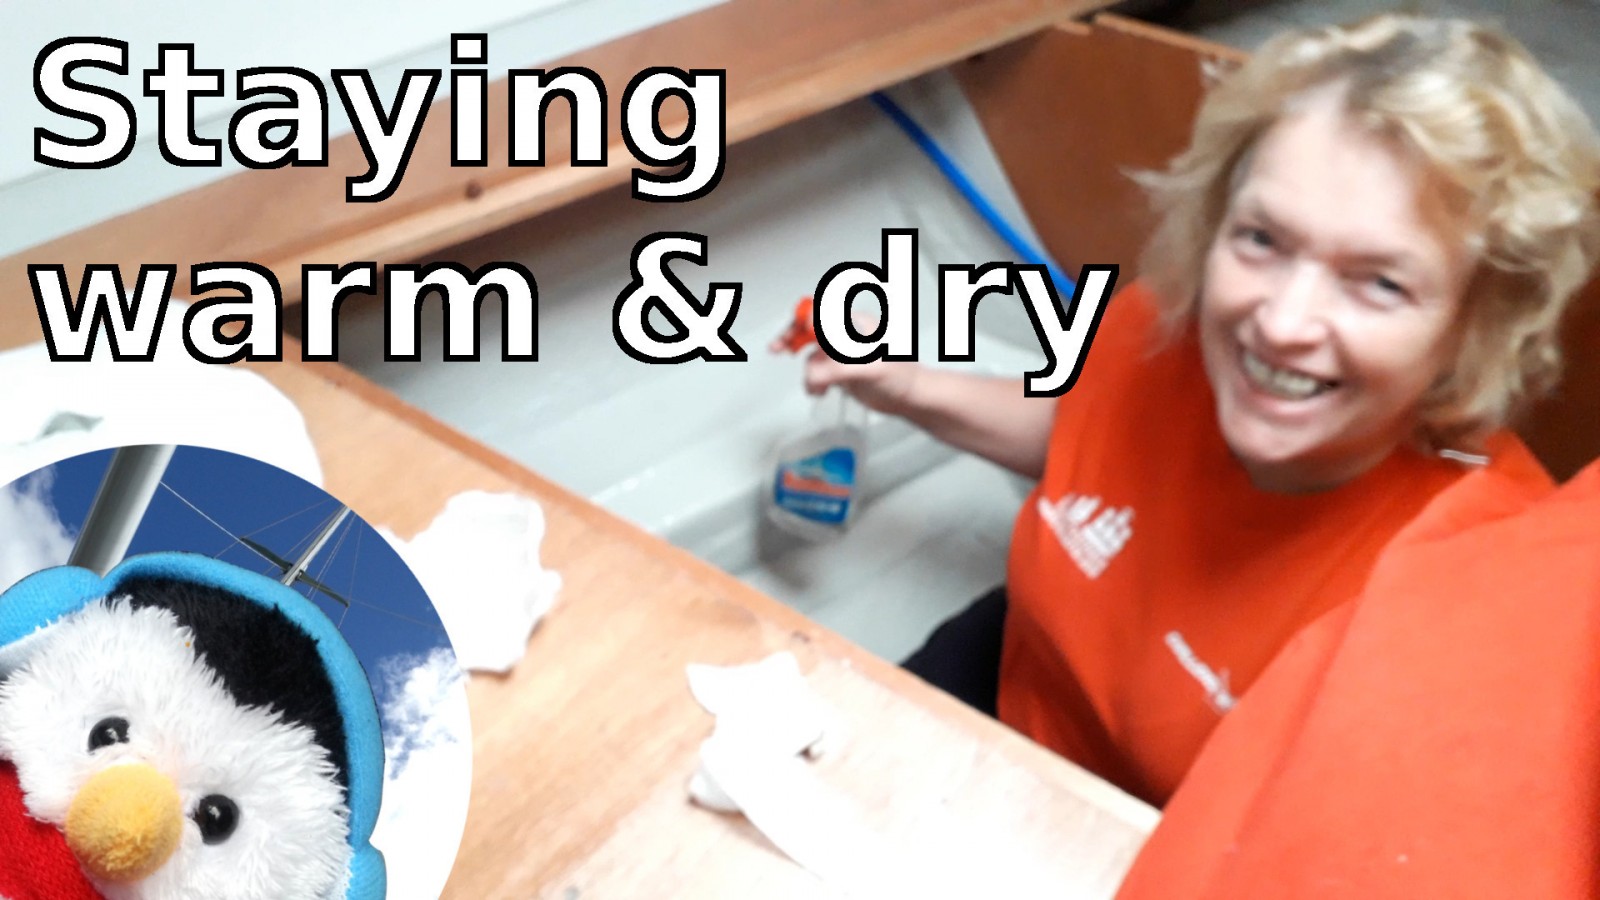 Watch our 'Staying warm and dry' video and make comments etc.